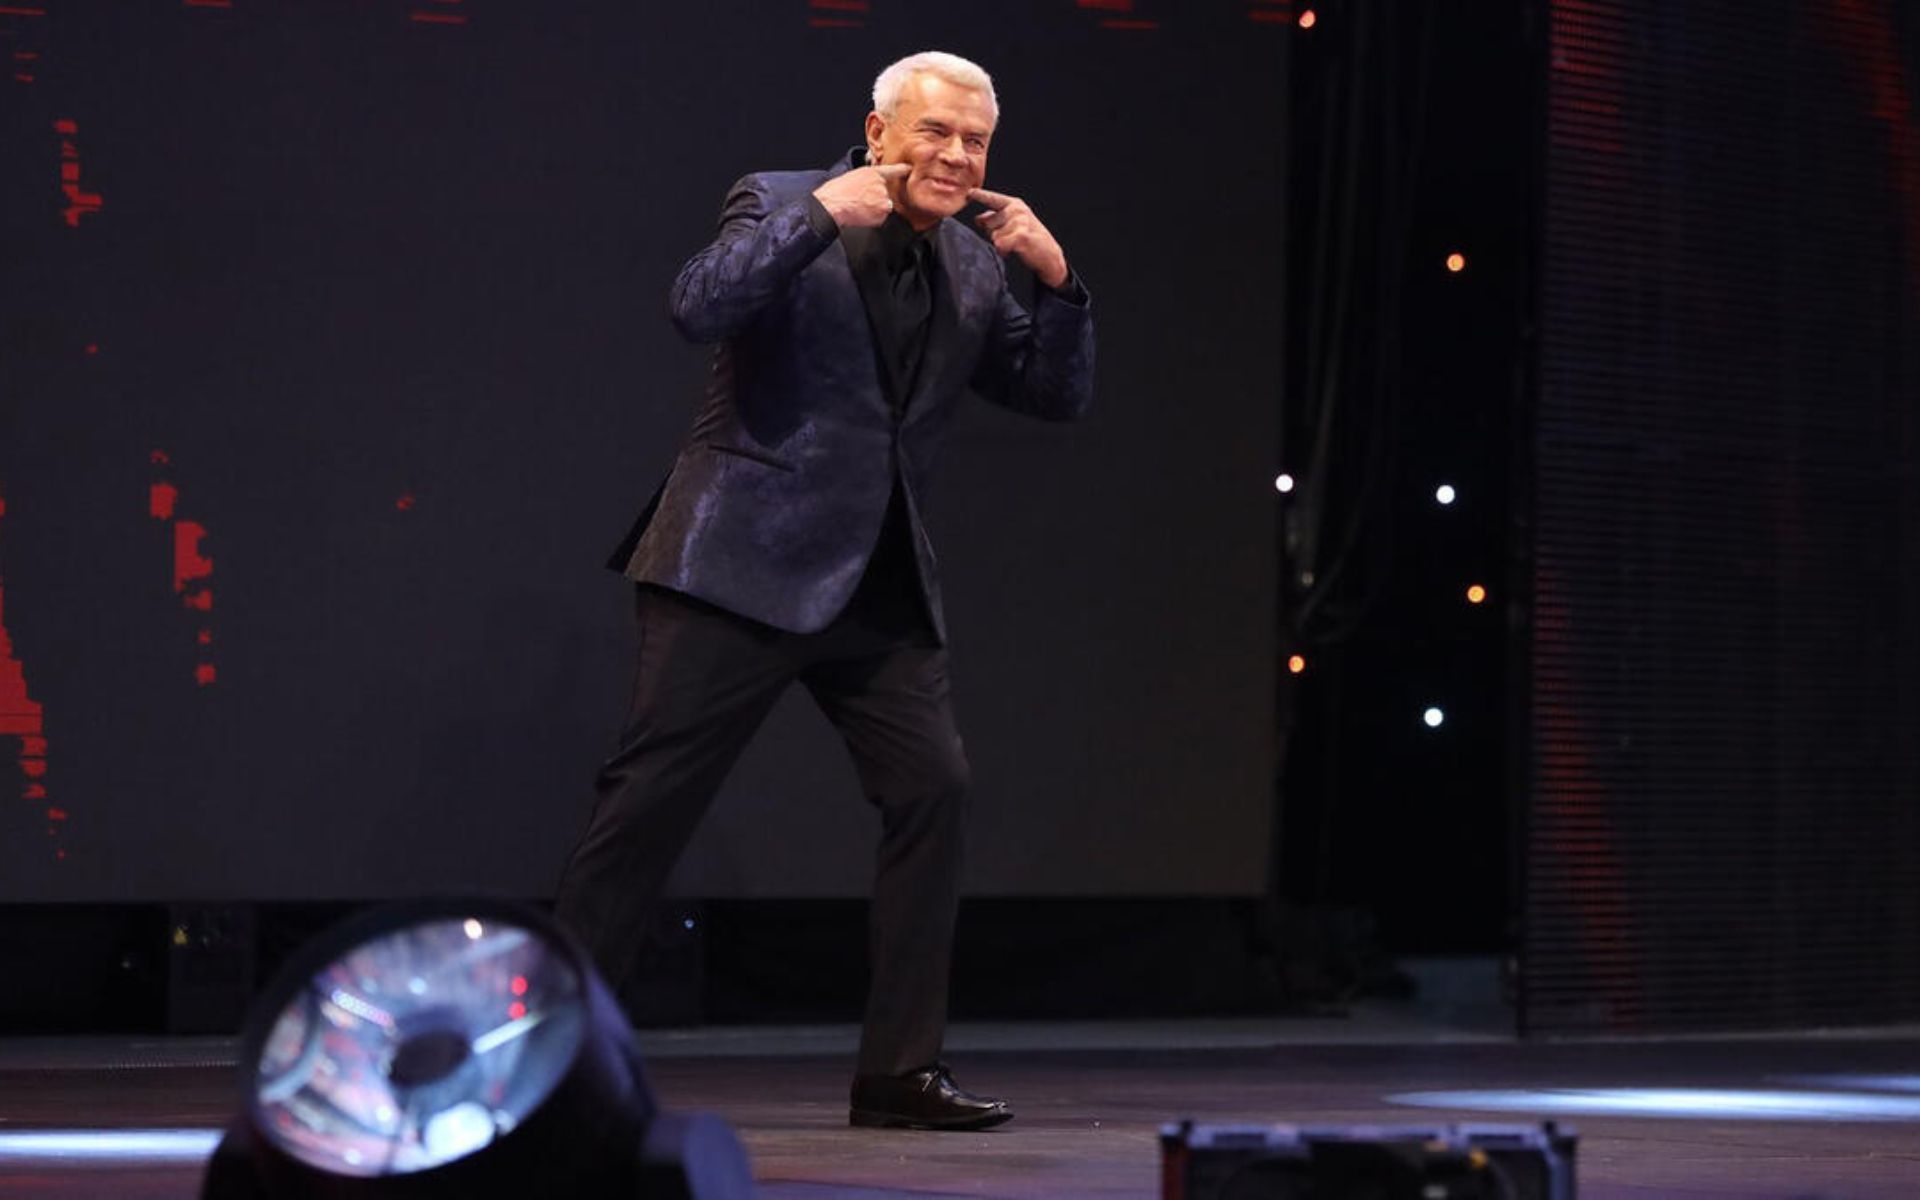 Eric Bischoff is one of the most influential figures in wrestling history.